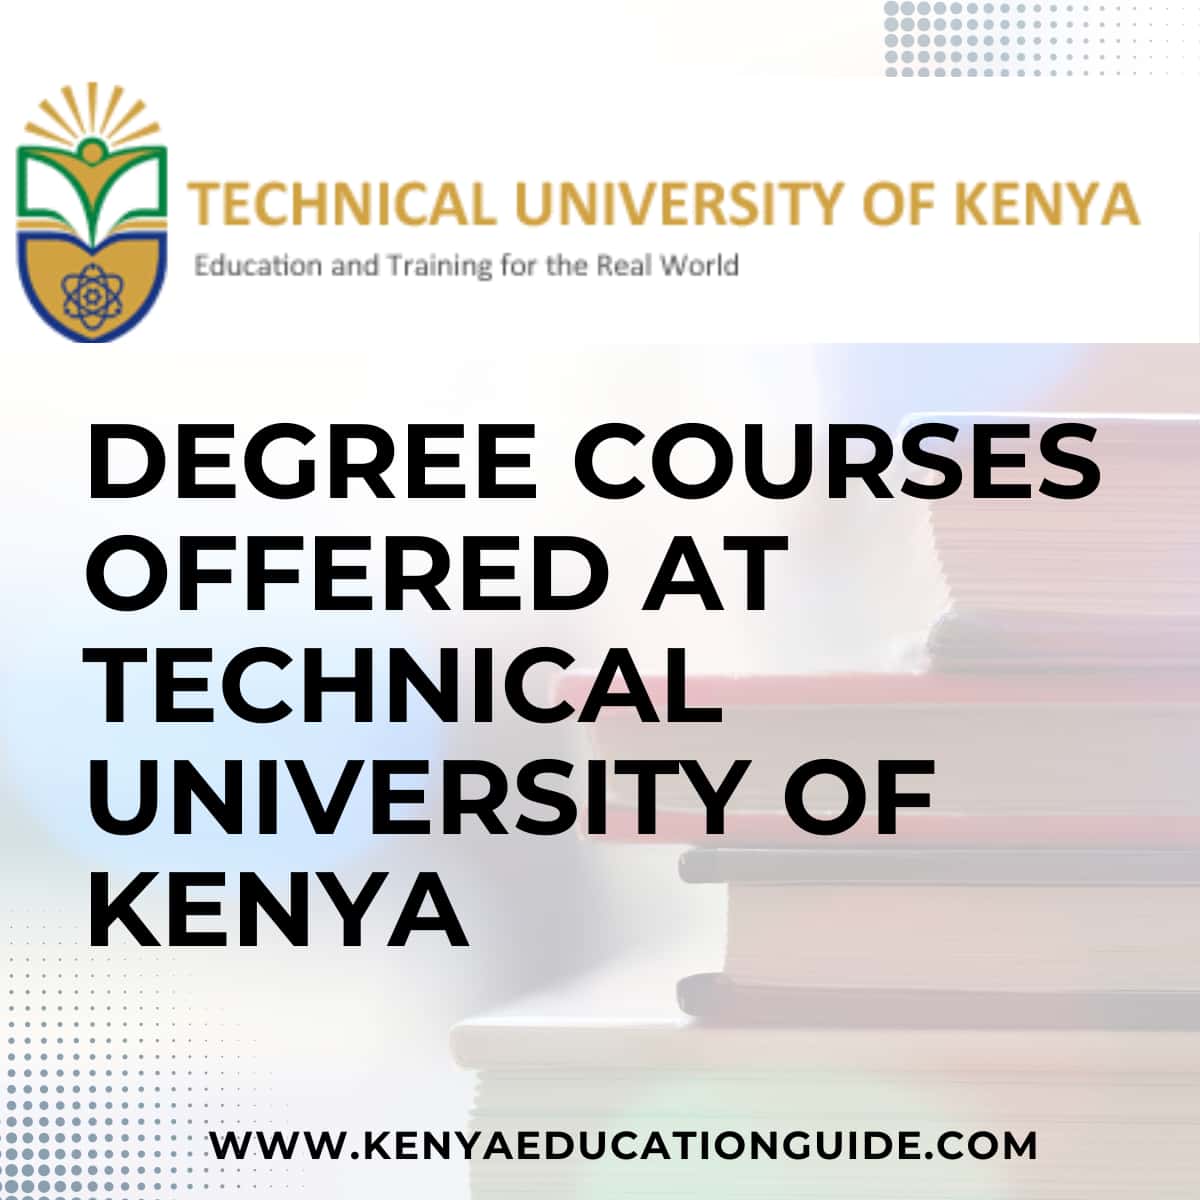 Degree Courses Offered at Technical University of Kenya